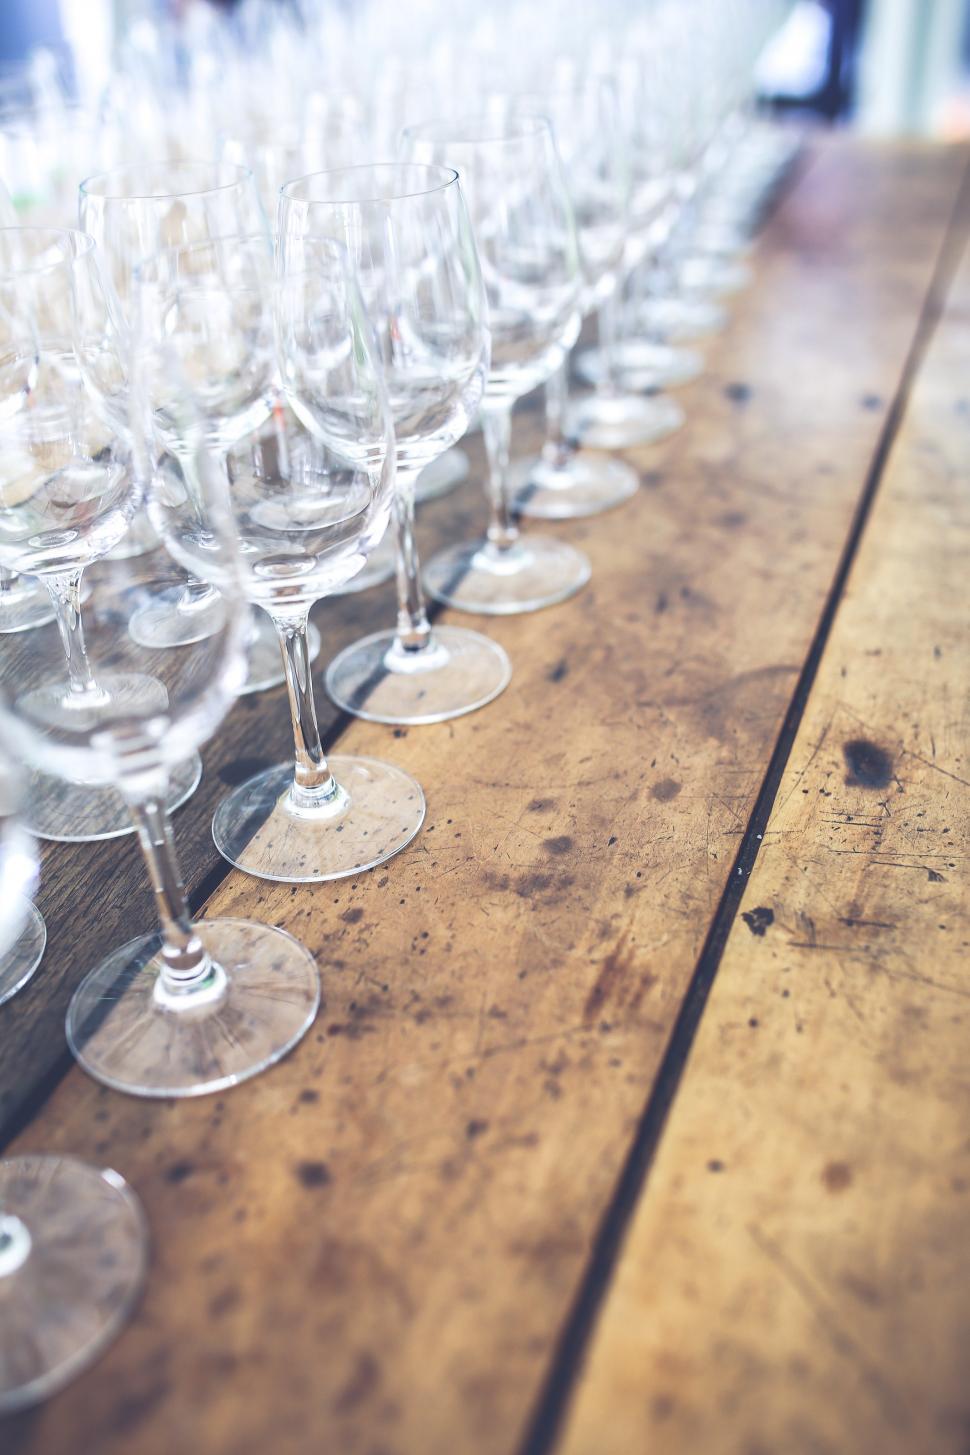 Free Image of Array of Wine Glasses on Table 